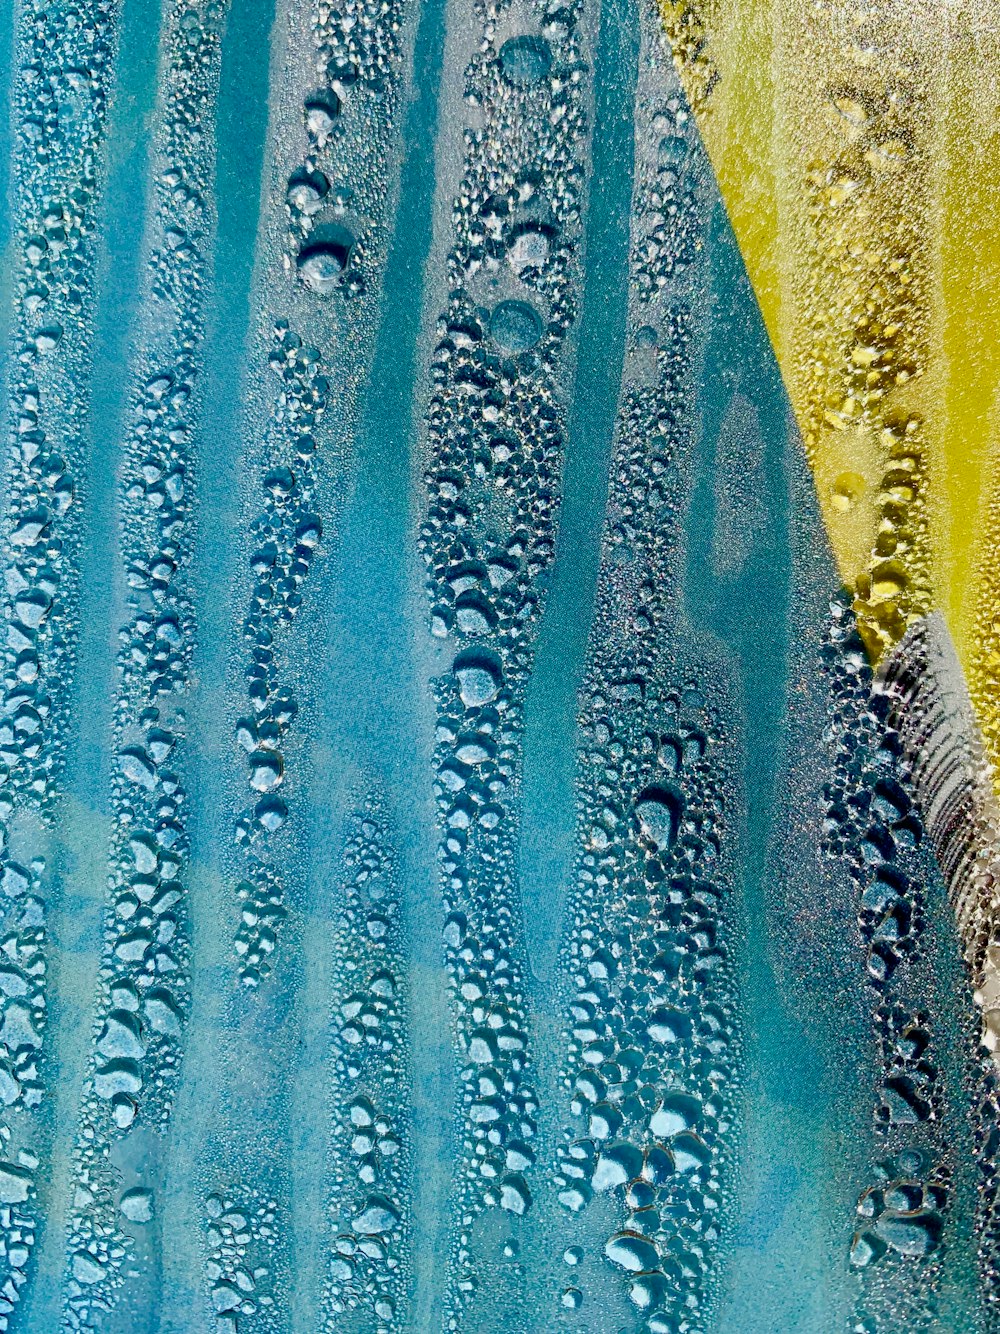 a blue and yellow painting with water drops on it